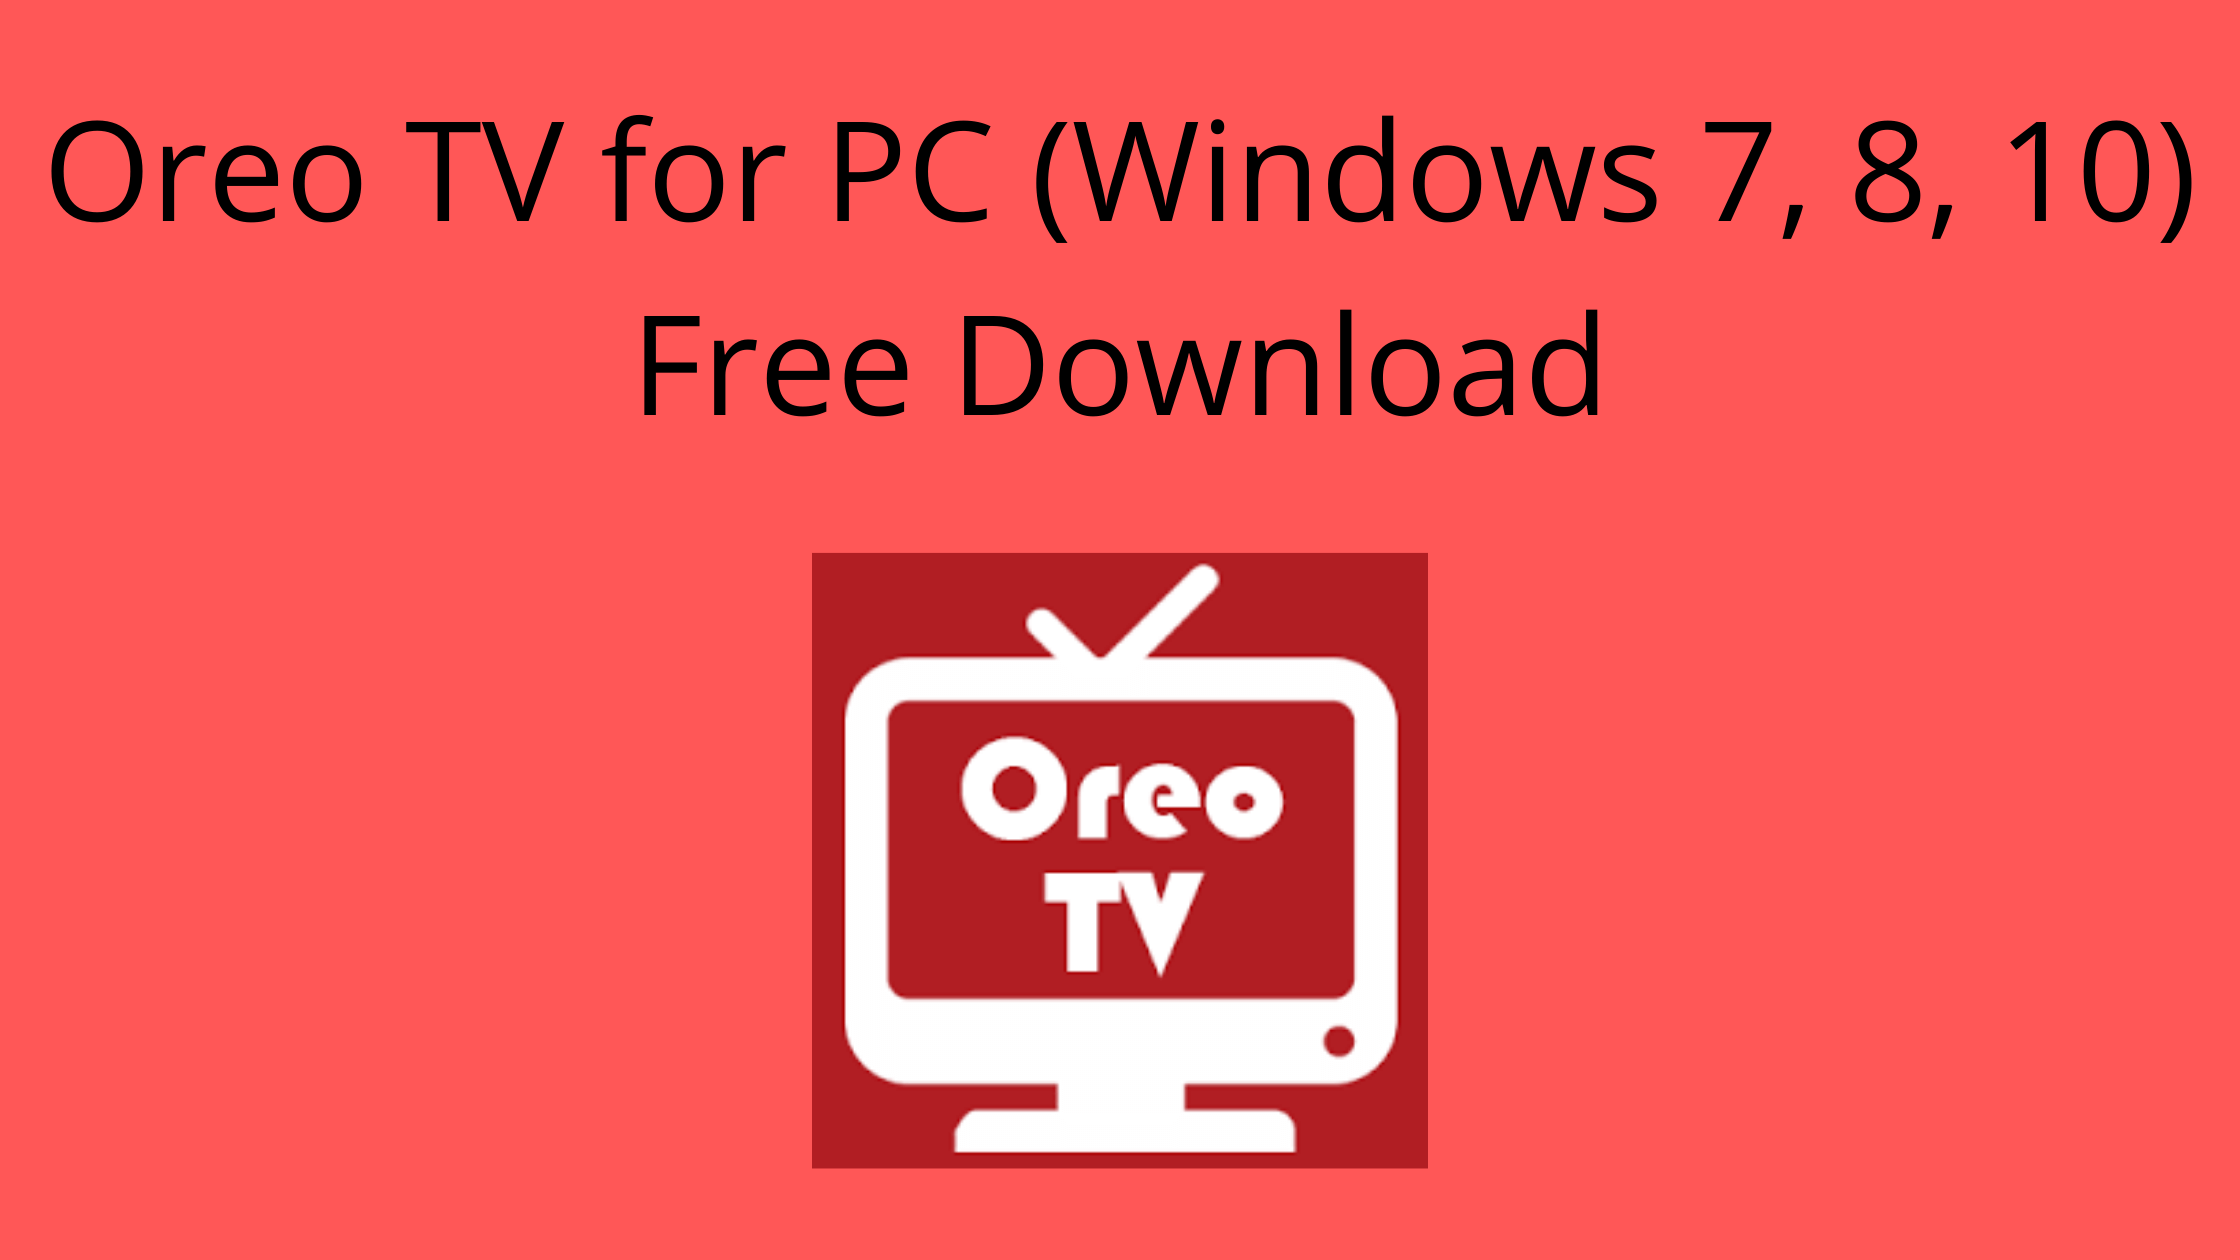 Oreo TV for PC (Windows 7, 8, 10) Free Download